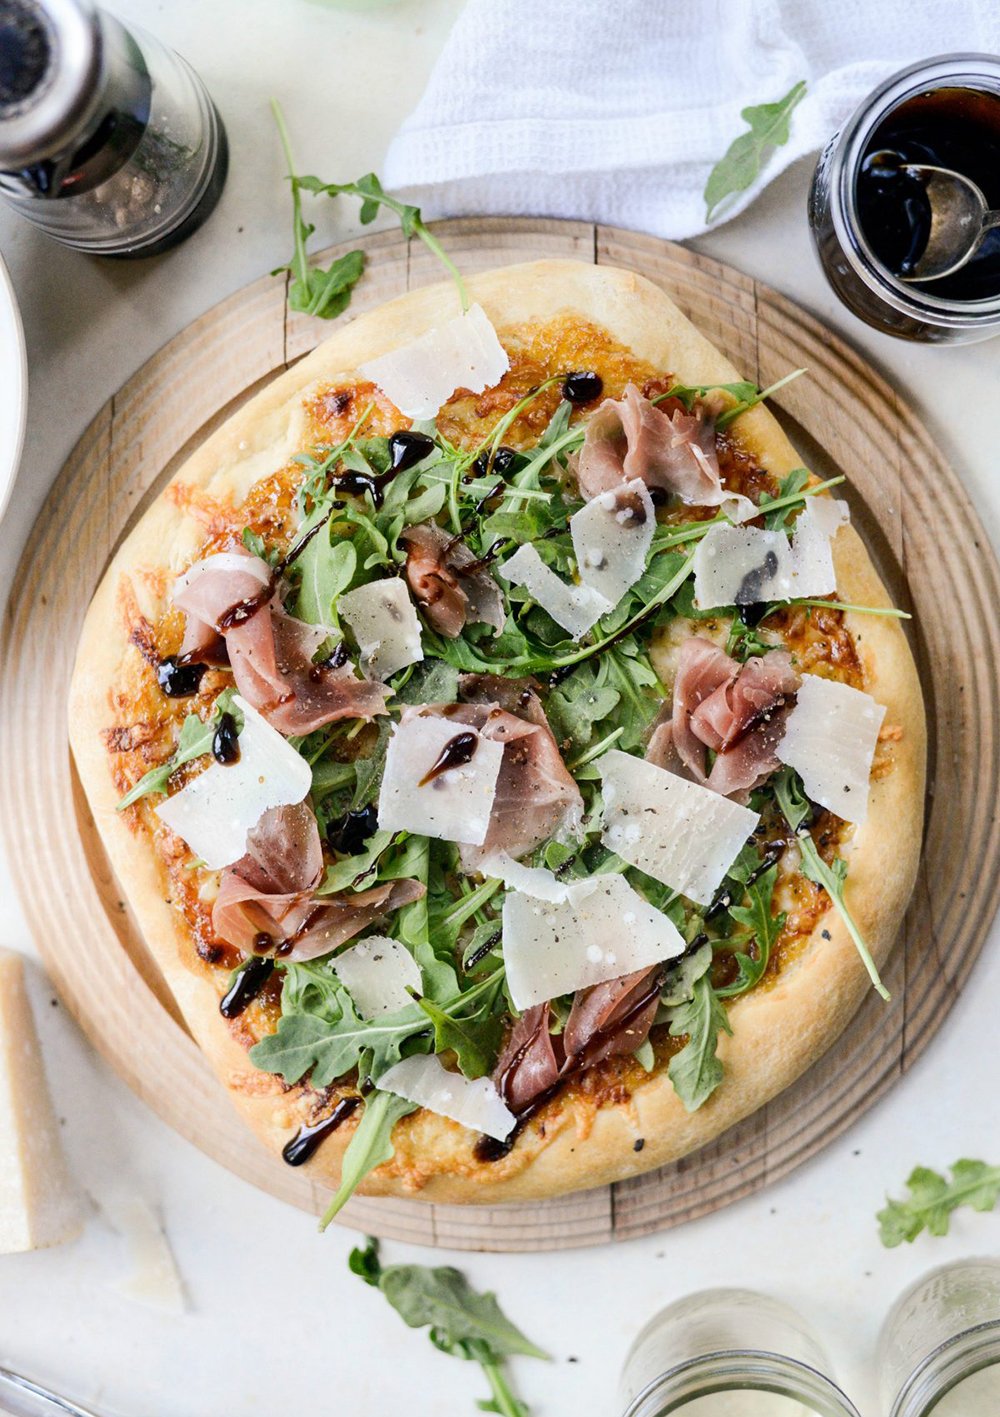 12 Homemade Pizza & Flatbread Recipes To Try - roomfortuesday.com